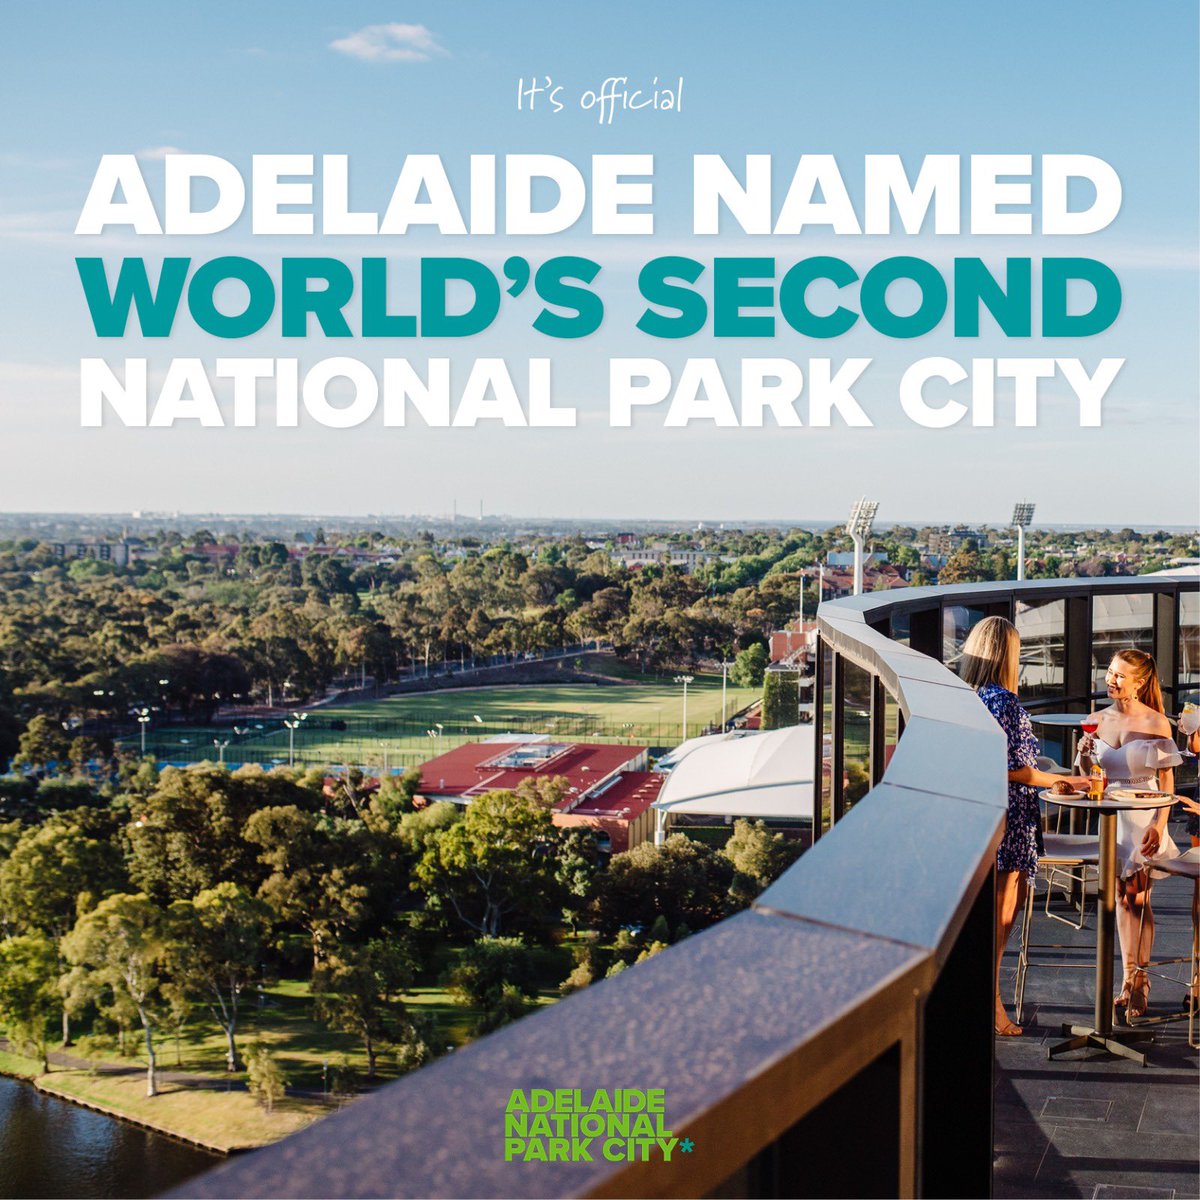 #Adelaide has officially been named the world’s second National Park City 🎉 

We’ve already be recognised as the most liveable city in the nation - now we’ve been applauded for the work we’re doing to look after our environment, boost conservation & connect people with nature.